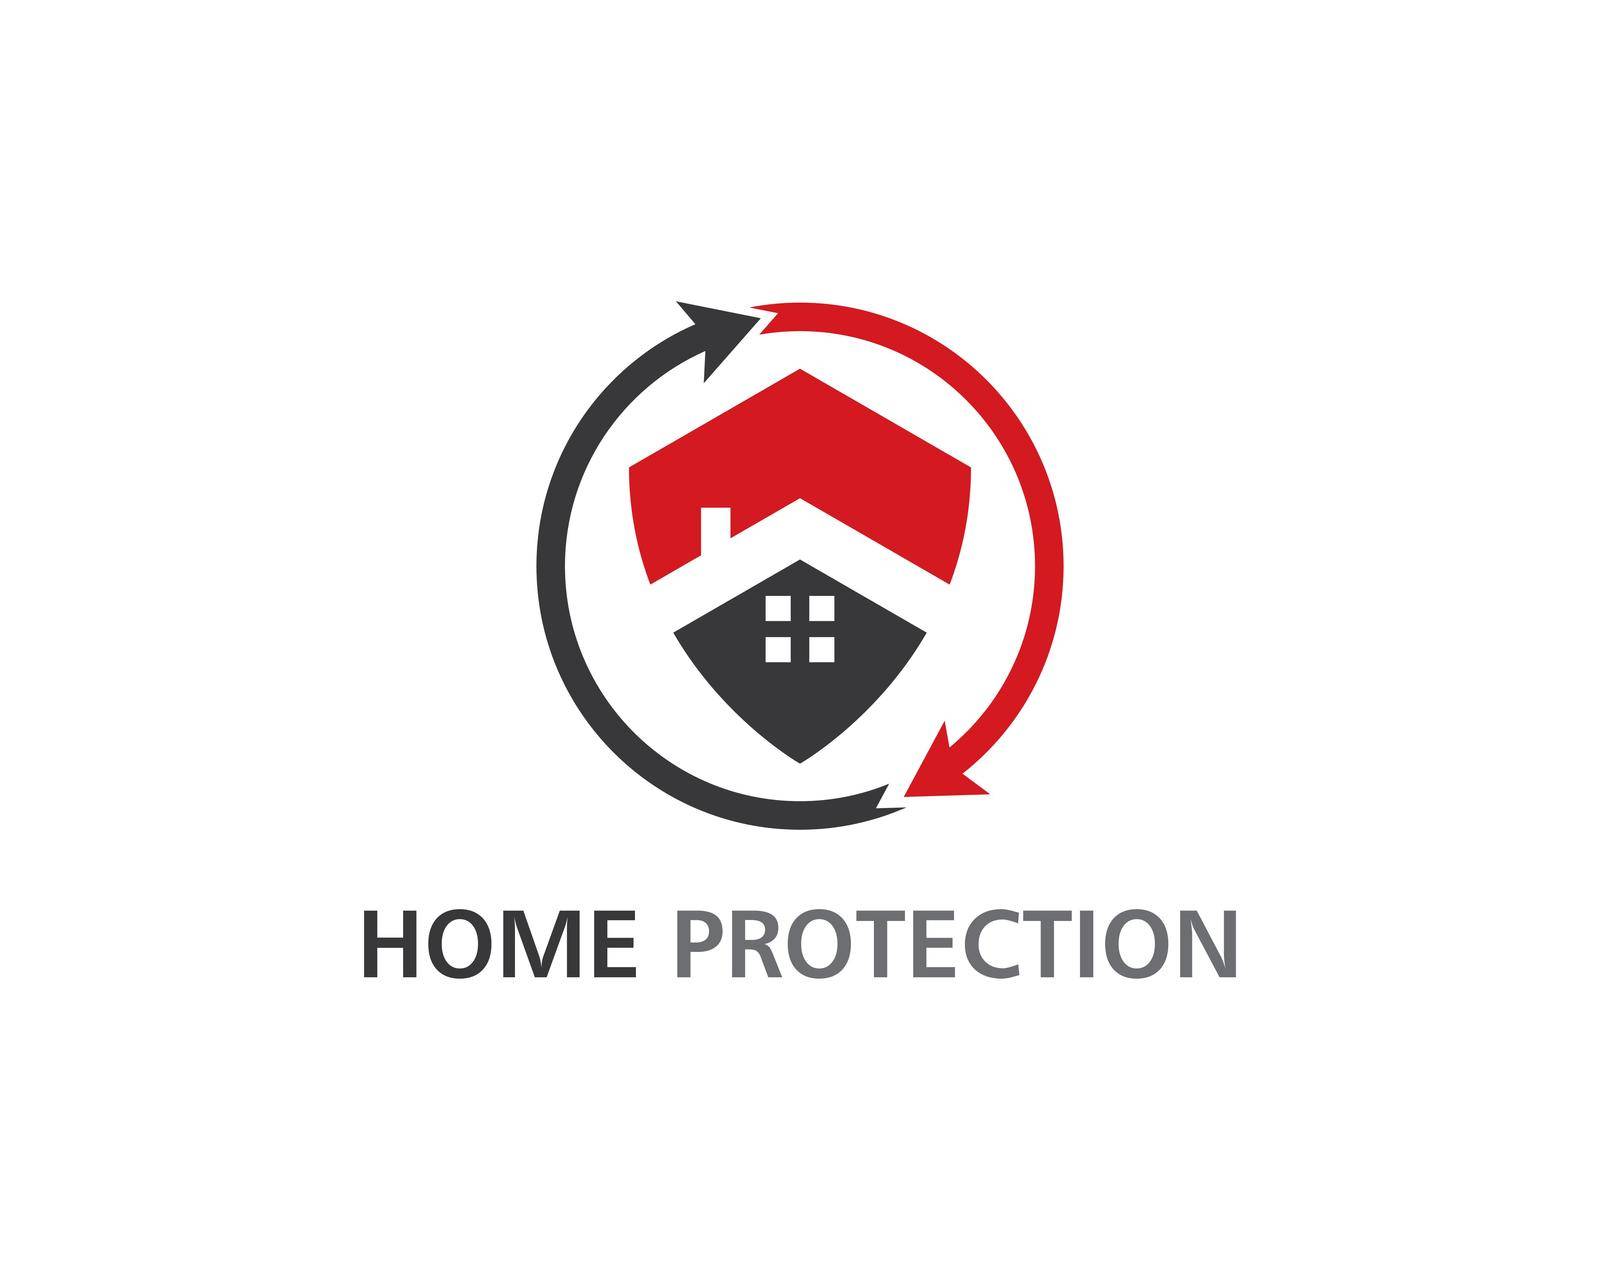 Home protection logo vector by awk